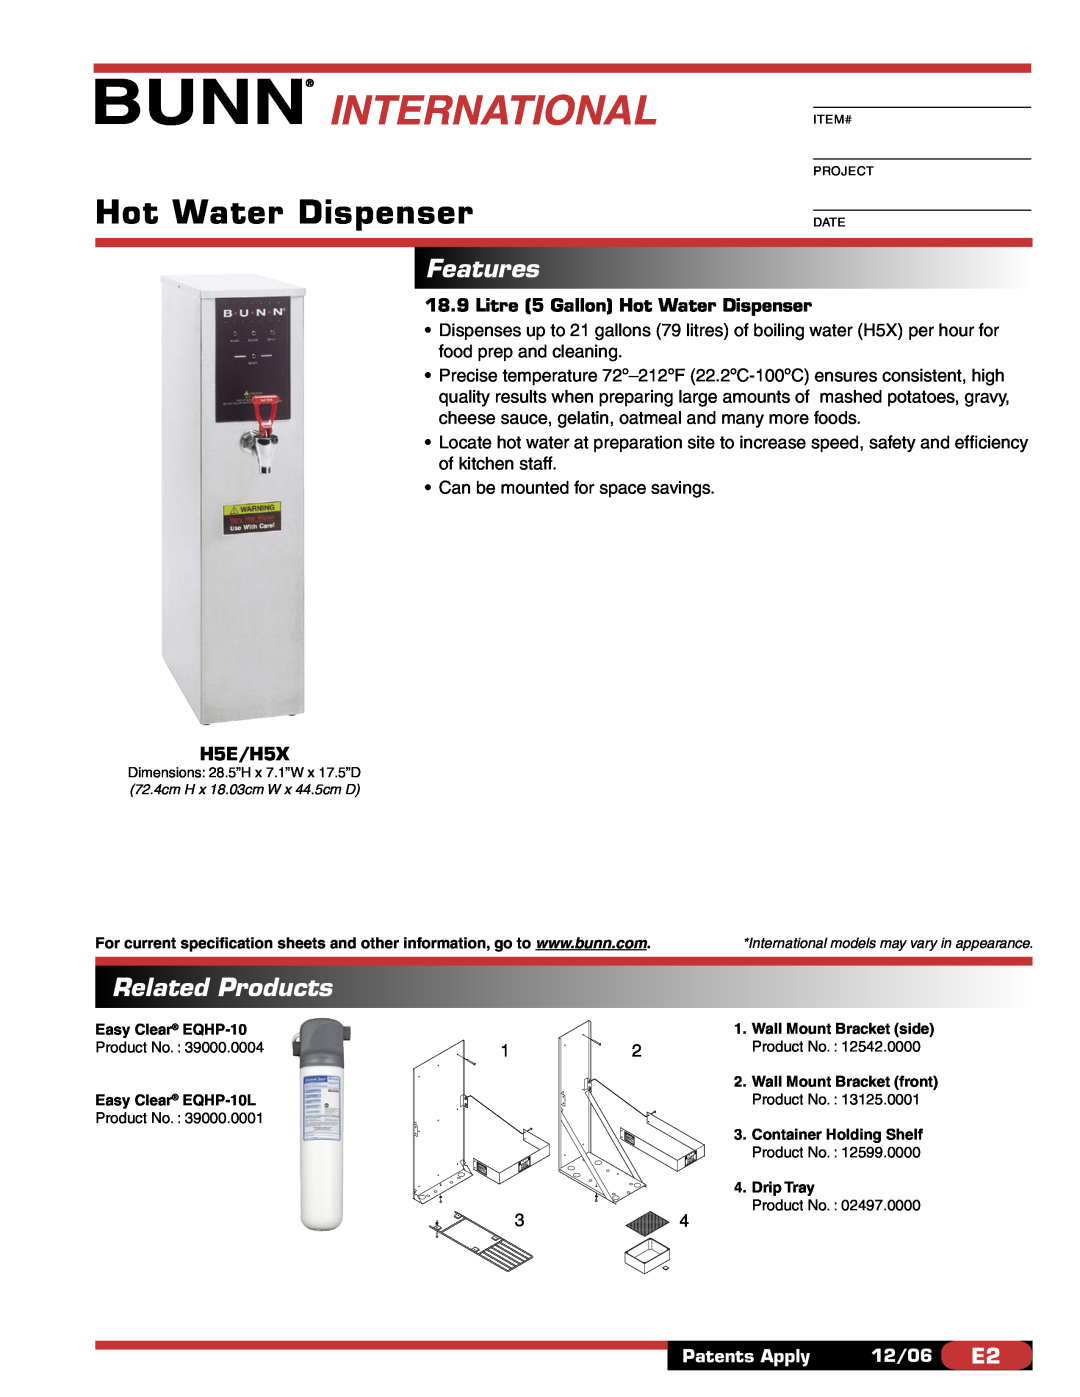 Bunn specifications International, Features, Related Products, Litre 5 Gallon Hot Water Dispenser, H5E/H5X 